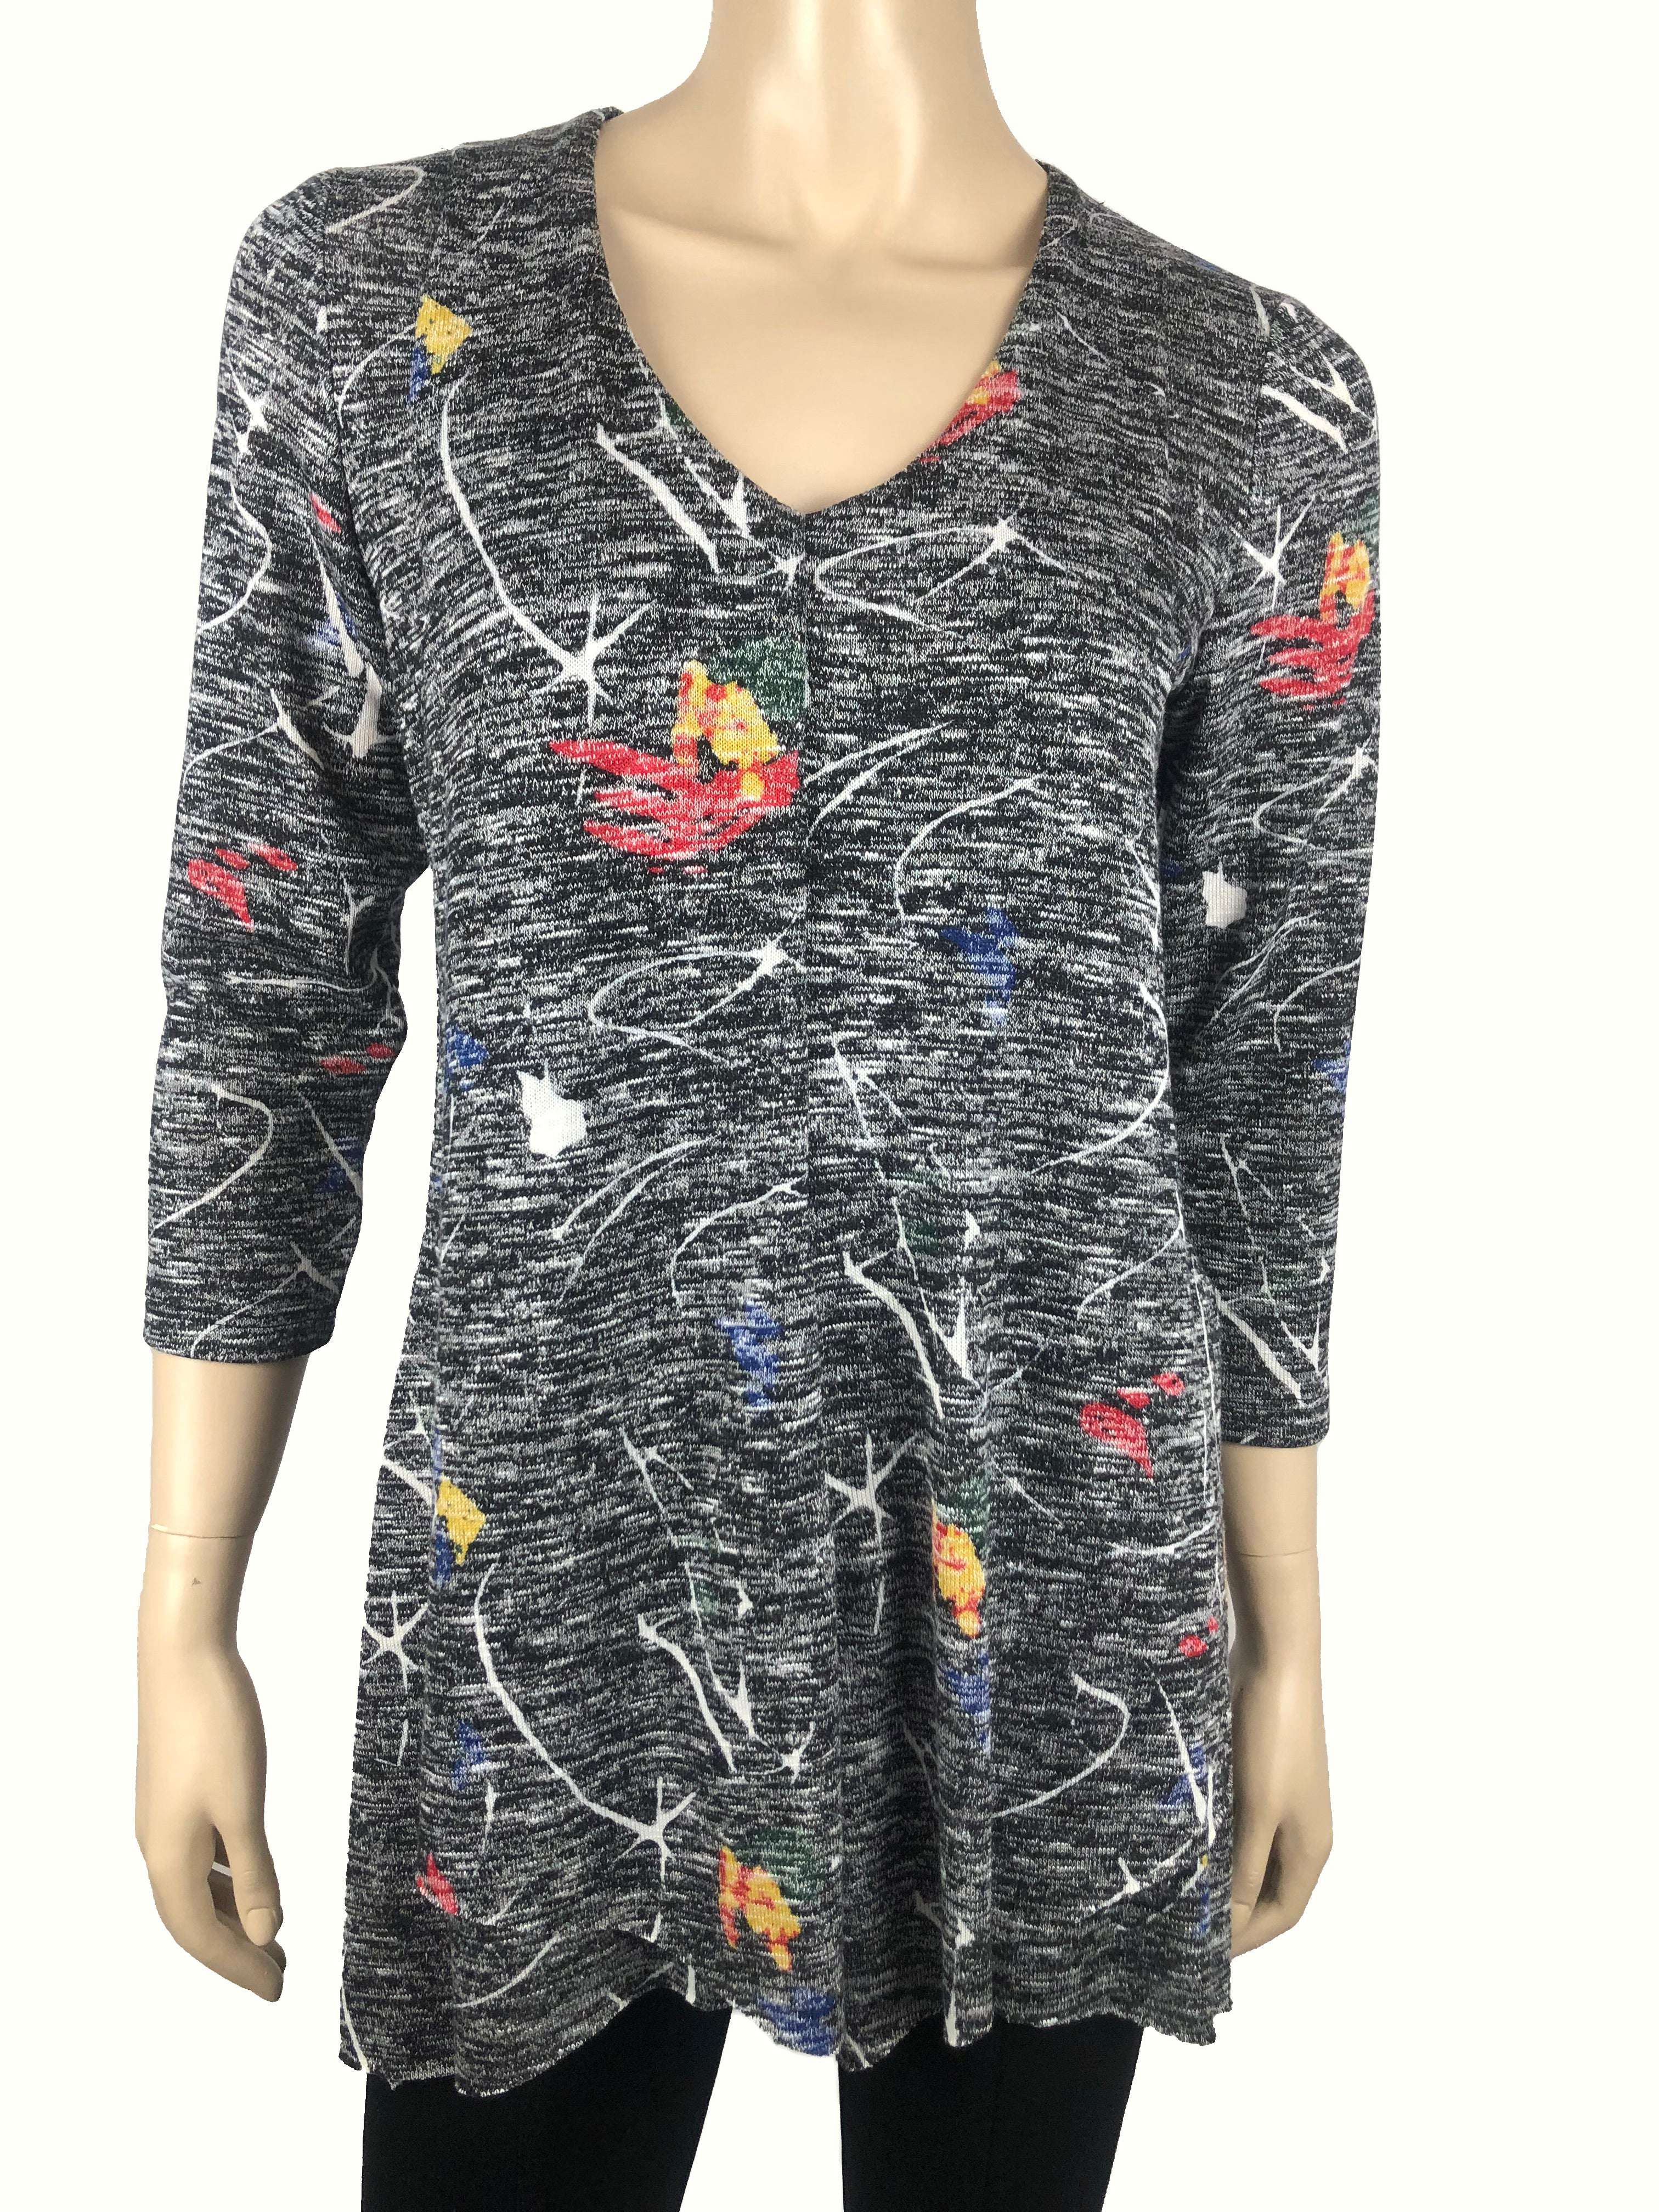 Women's s s s Tops XLarge Sizes Flattering Fit Our Best Seller Comfort Quality Made in Canada Marie BoutiquesYvonne - Yvonne Marie - Yvonne Marie